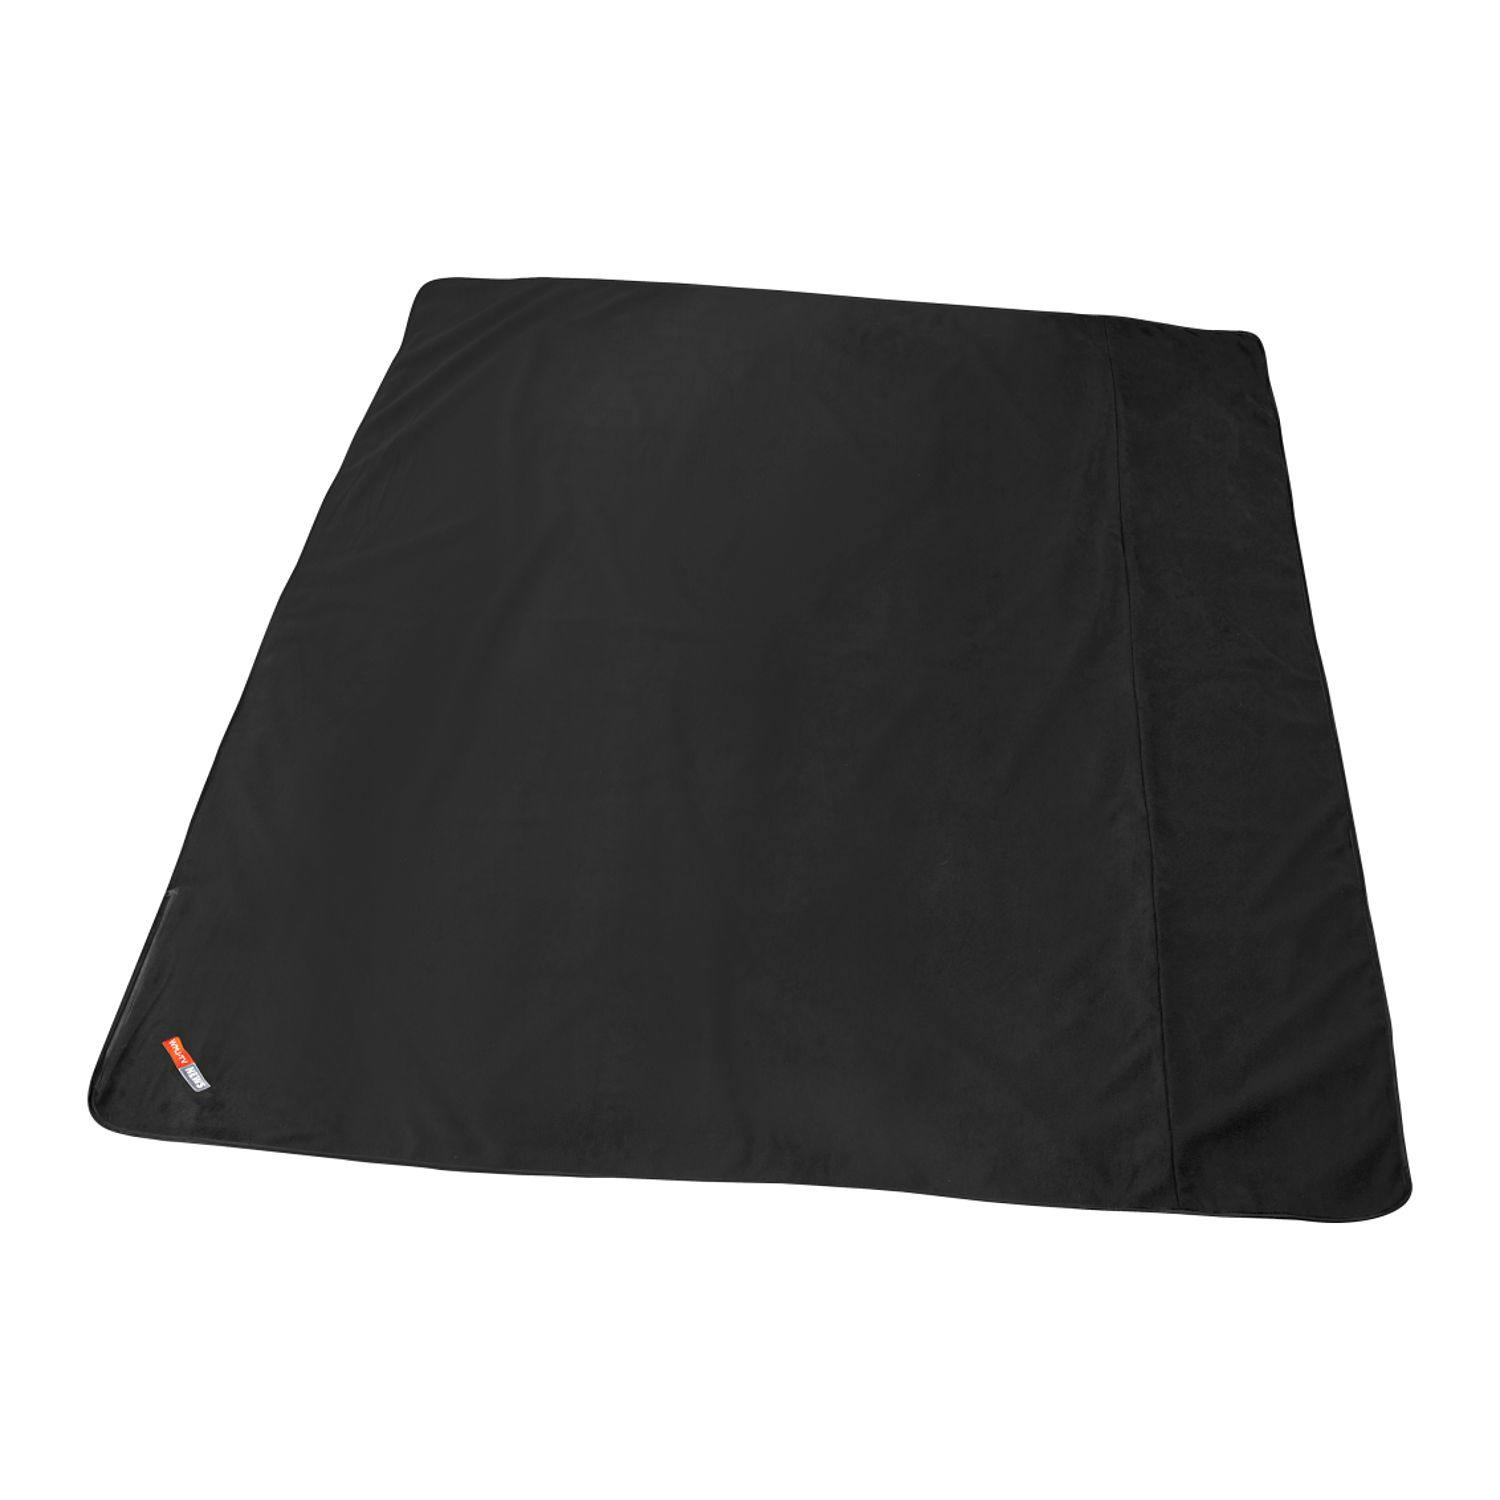 Oversized Waterproof Outdoor Blanket with Pouch - additional Image 2